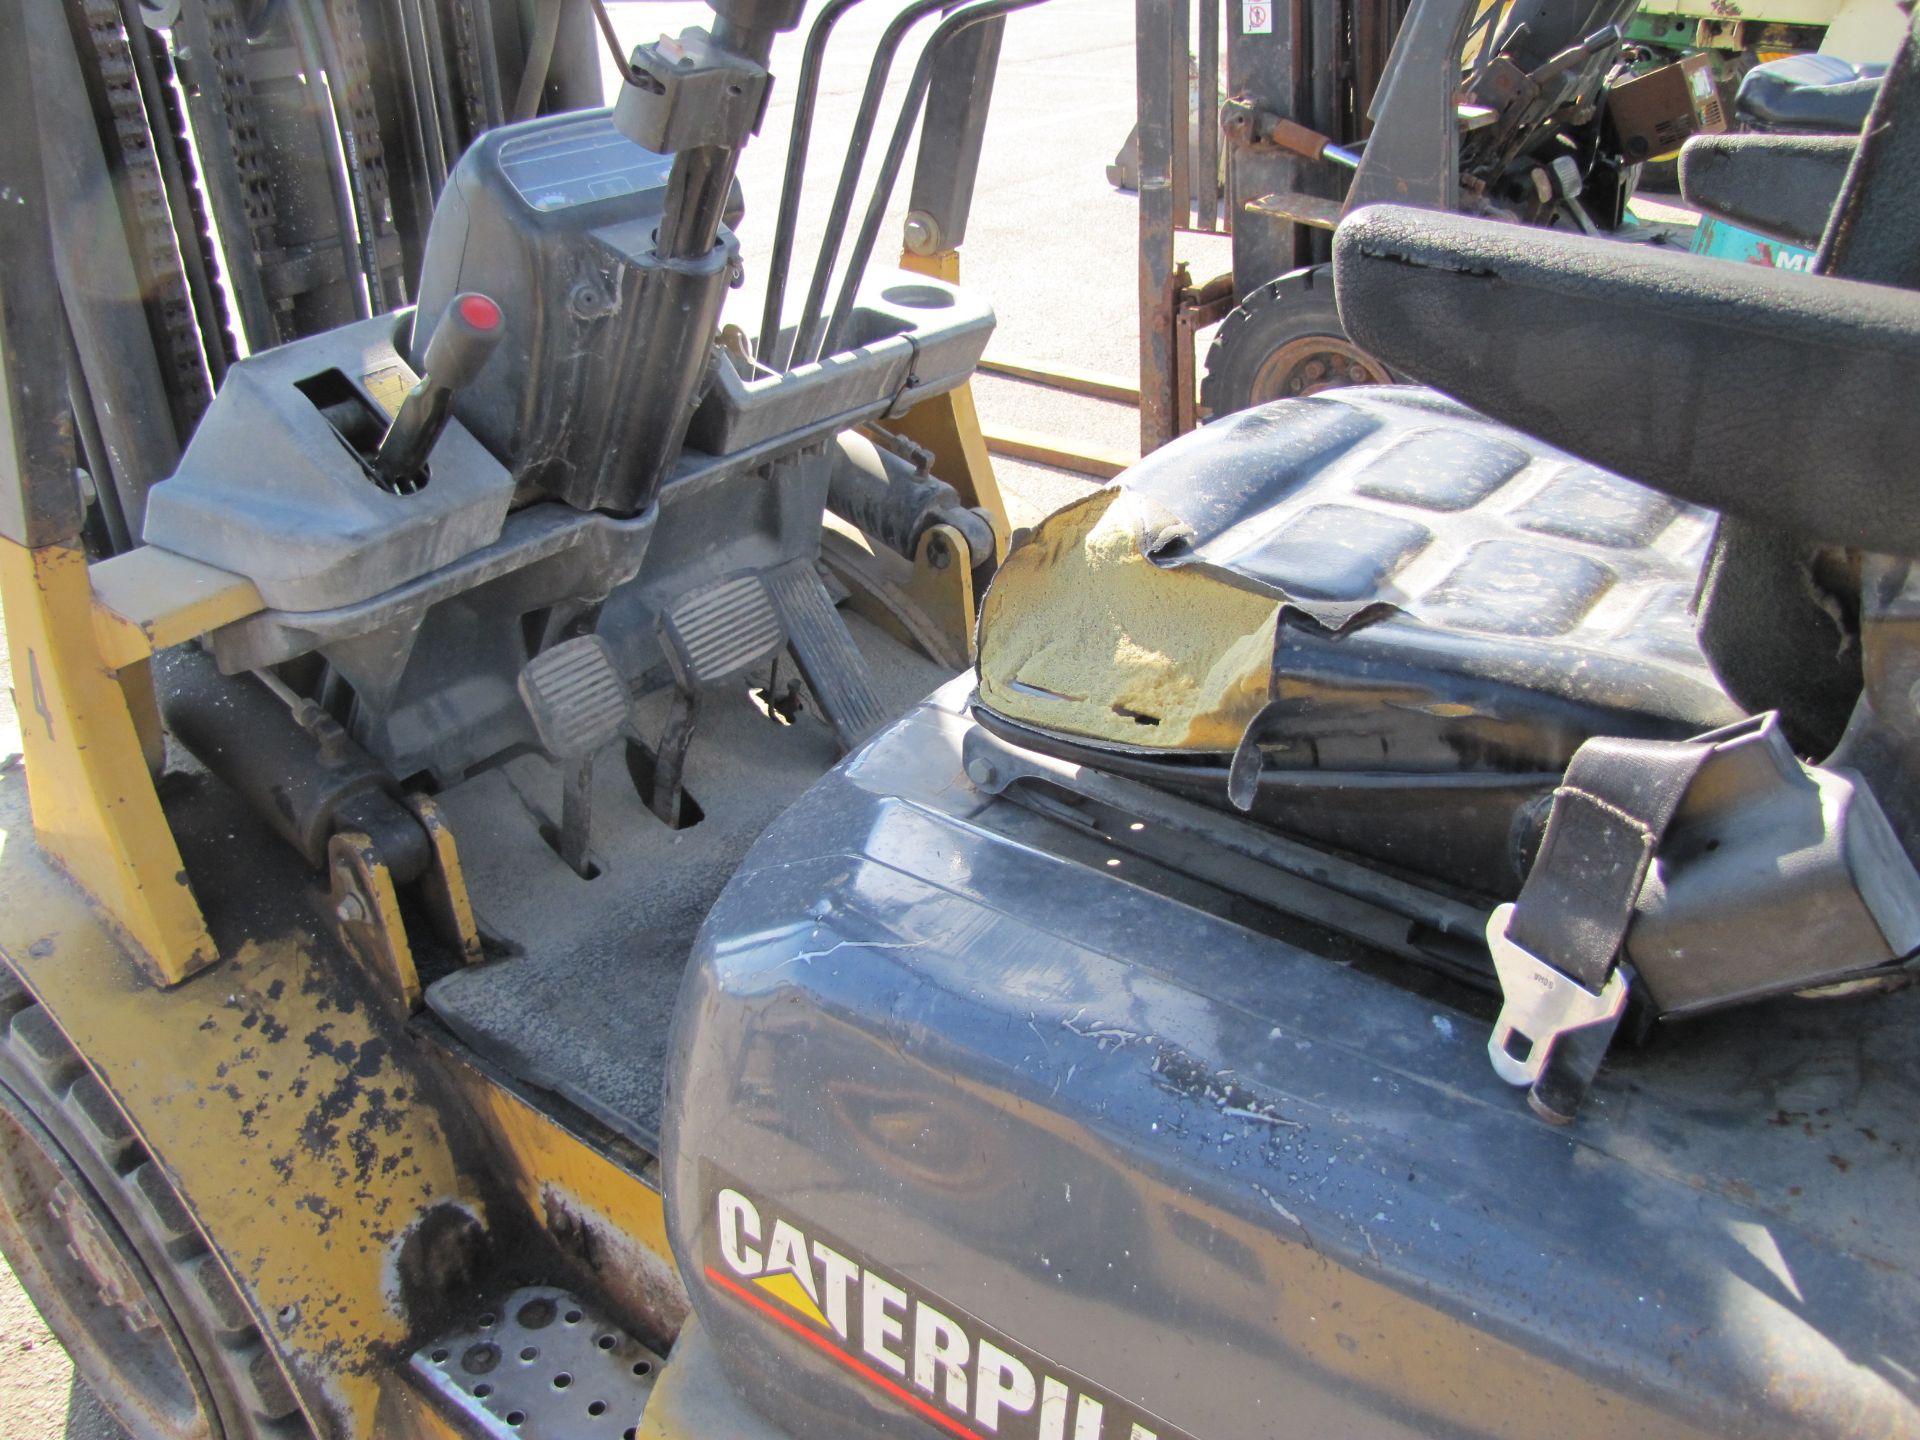 Caterpillar 60 forklift, 4500 lb capacity, propane, 3-stage, side shift, 28x9/15 fronts - Image 8 of 17